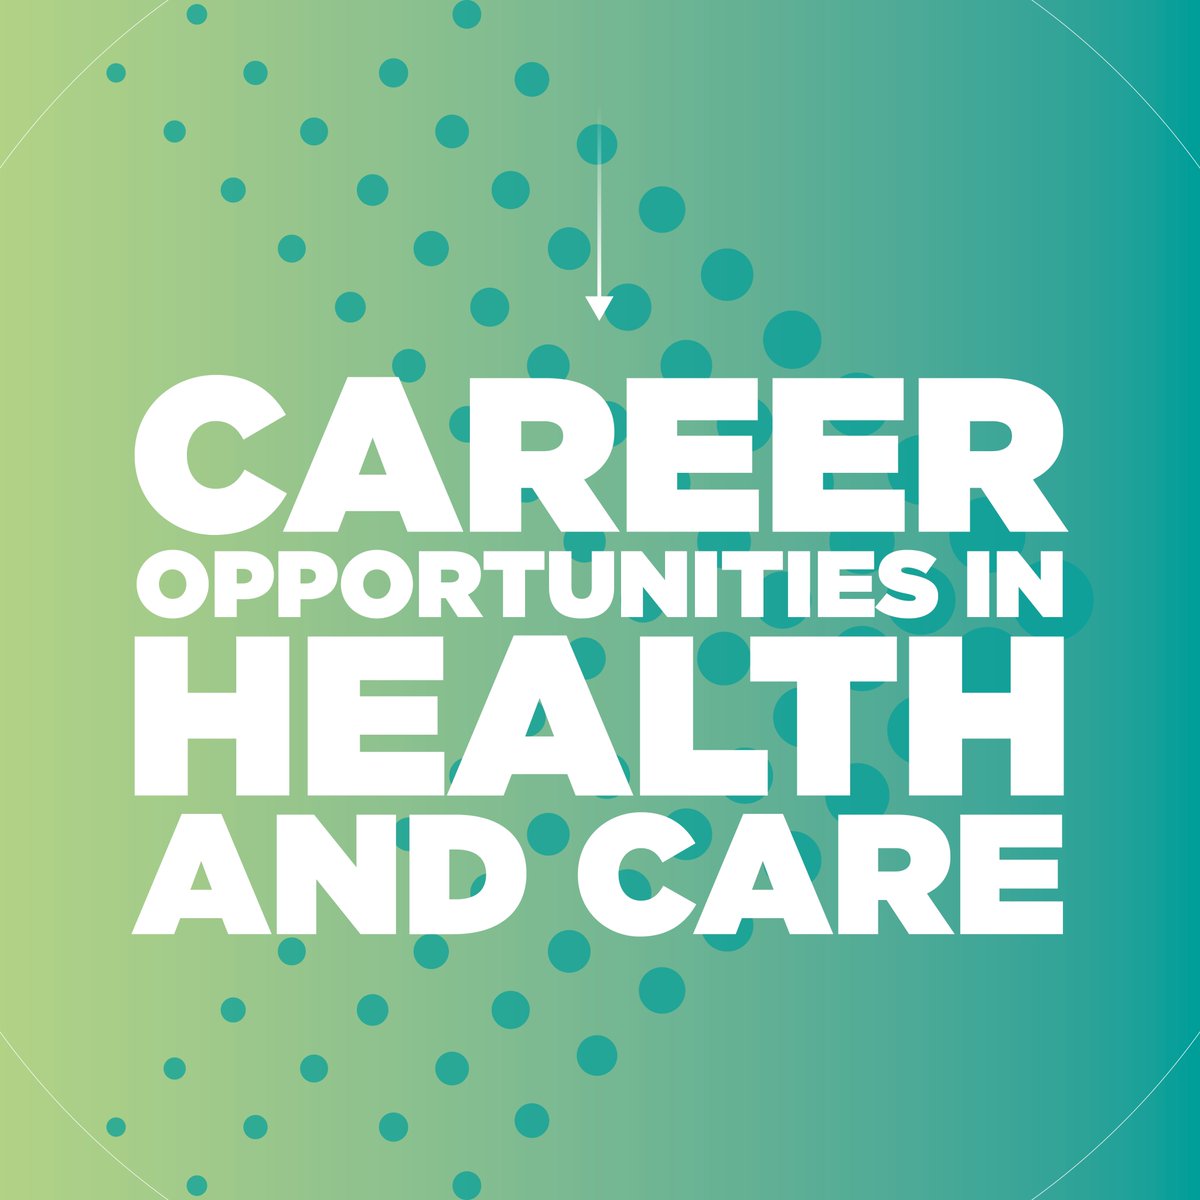 Interested in a career in health & care, or looking for new opportunities to build on your experience in the sector? No matter your qualifications or level of experience, discover the exciting roles, training & development opportunities available in Leeds: leedshealthandcareacademy.org/careers/